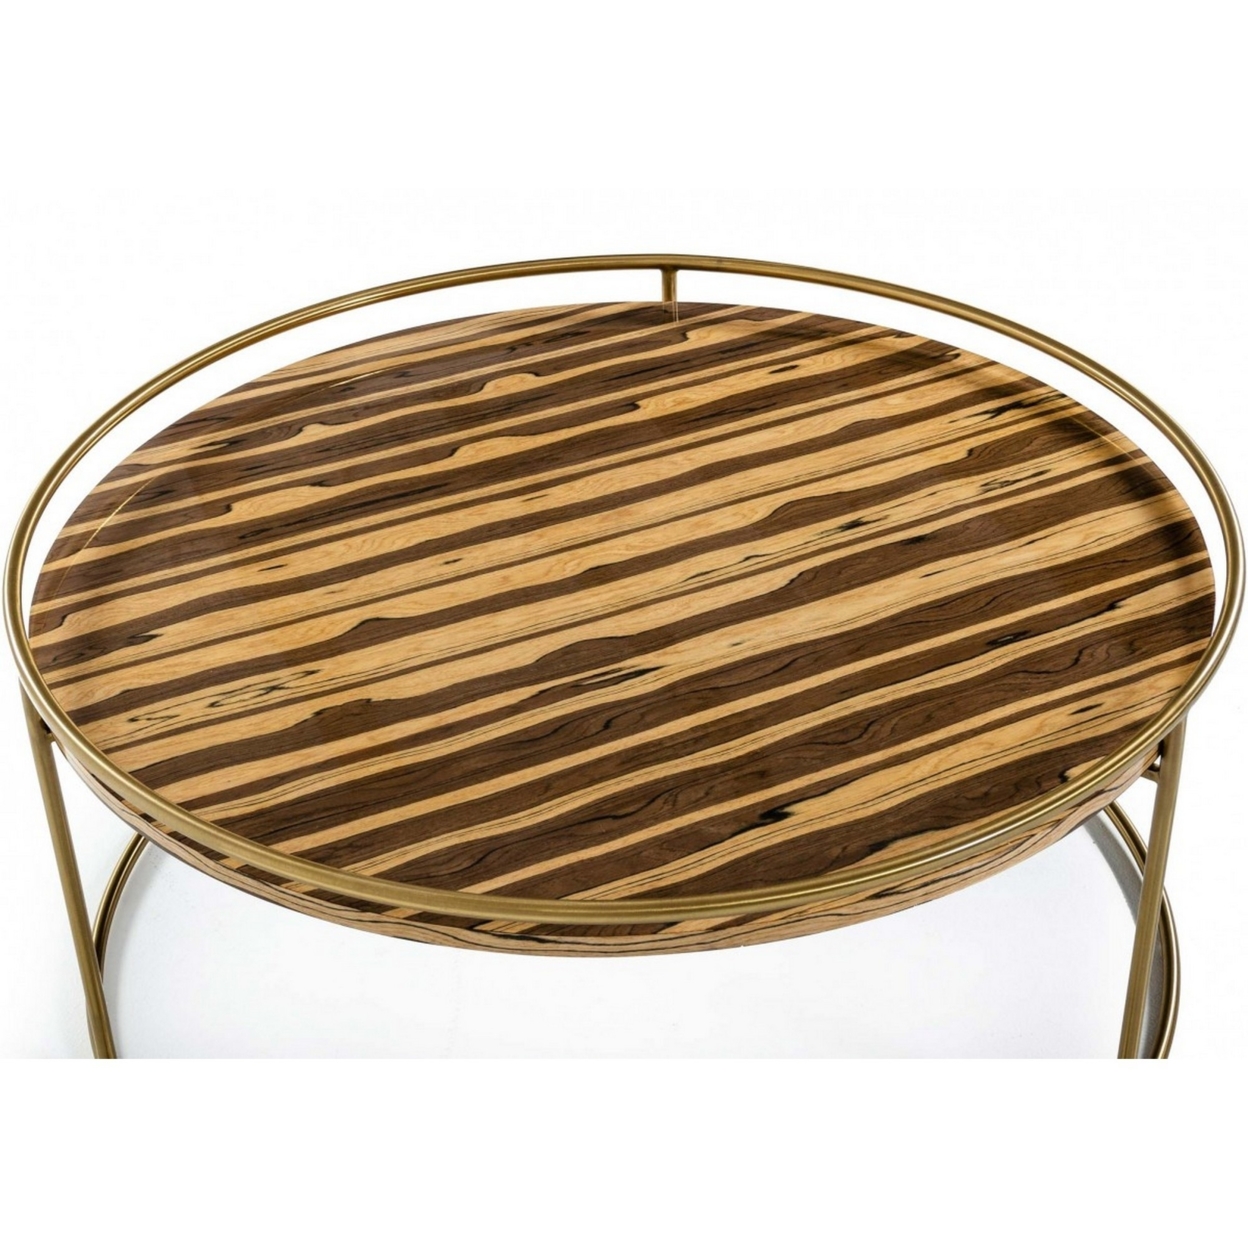 Round Faux Marble Top Coffee Table With Steel Frame, Brown And Gold- Saltoro Sherpi